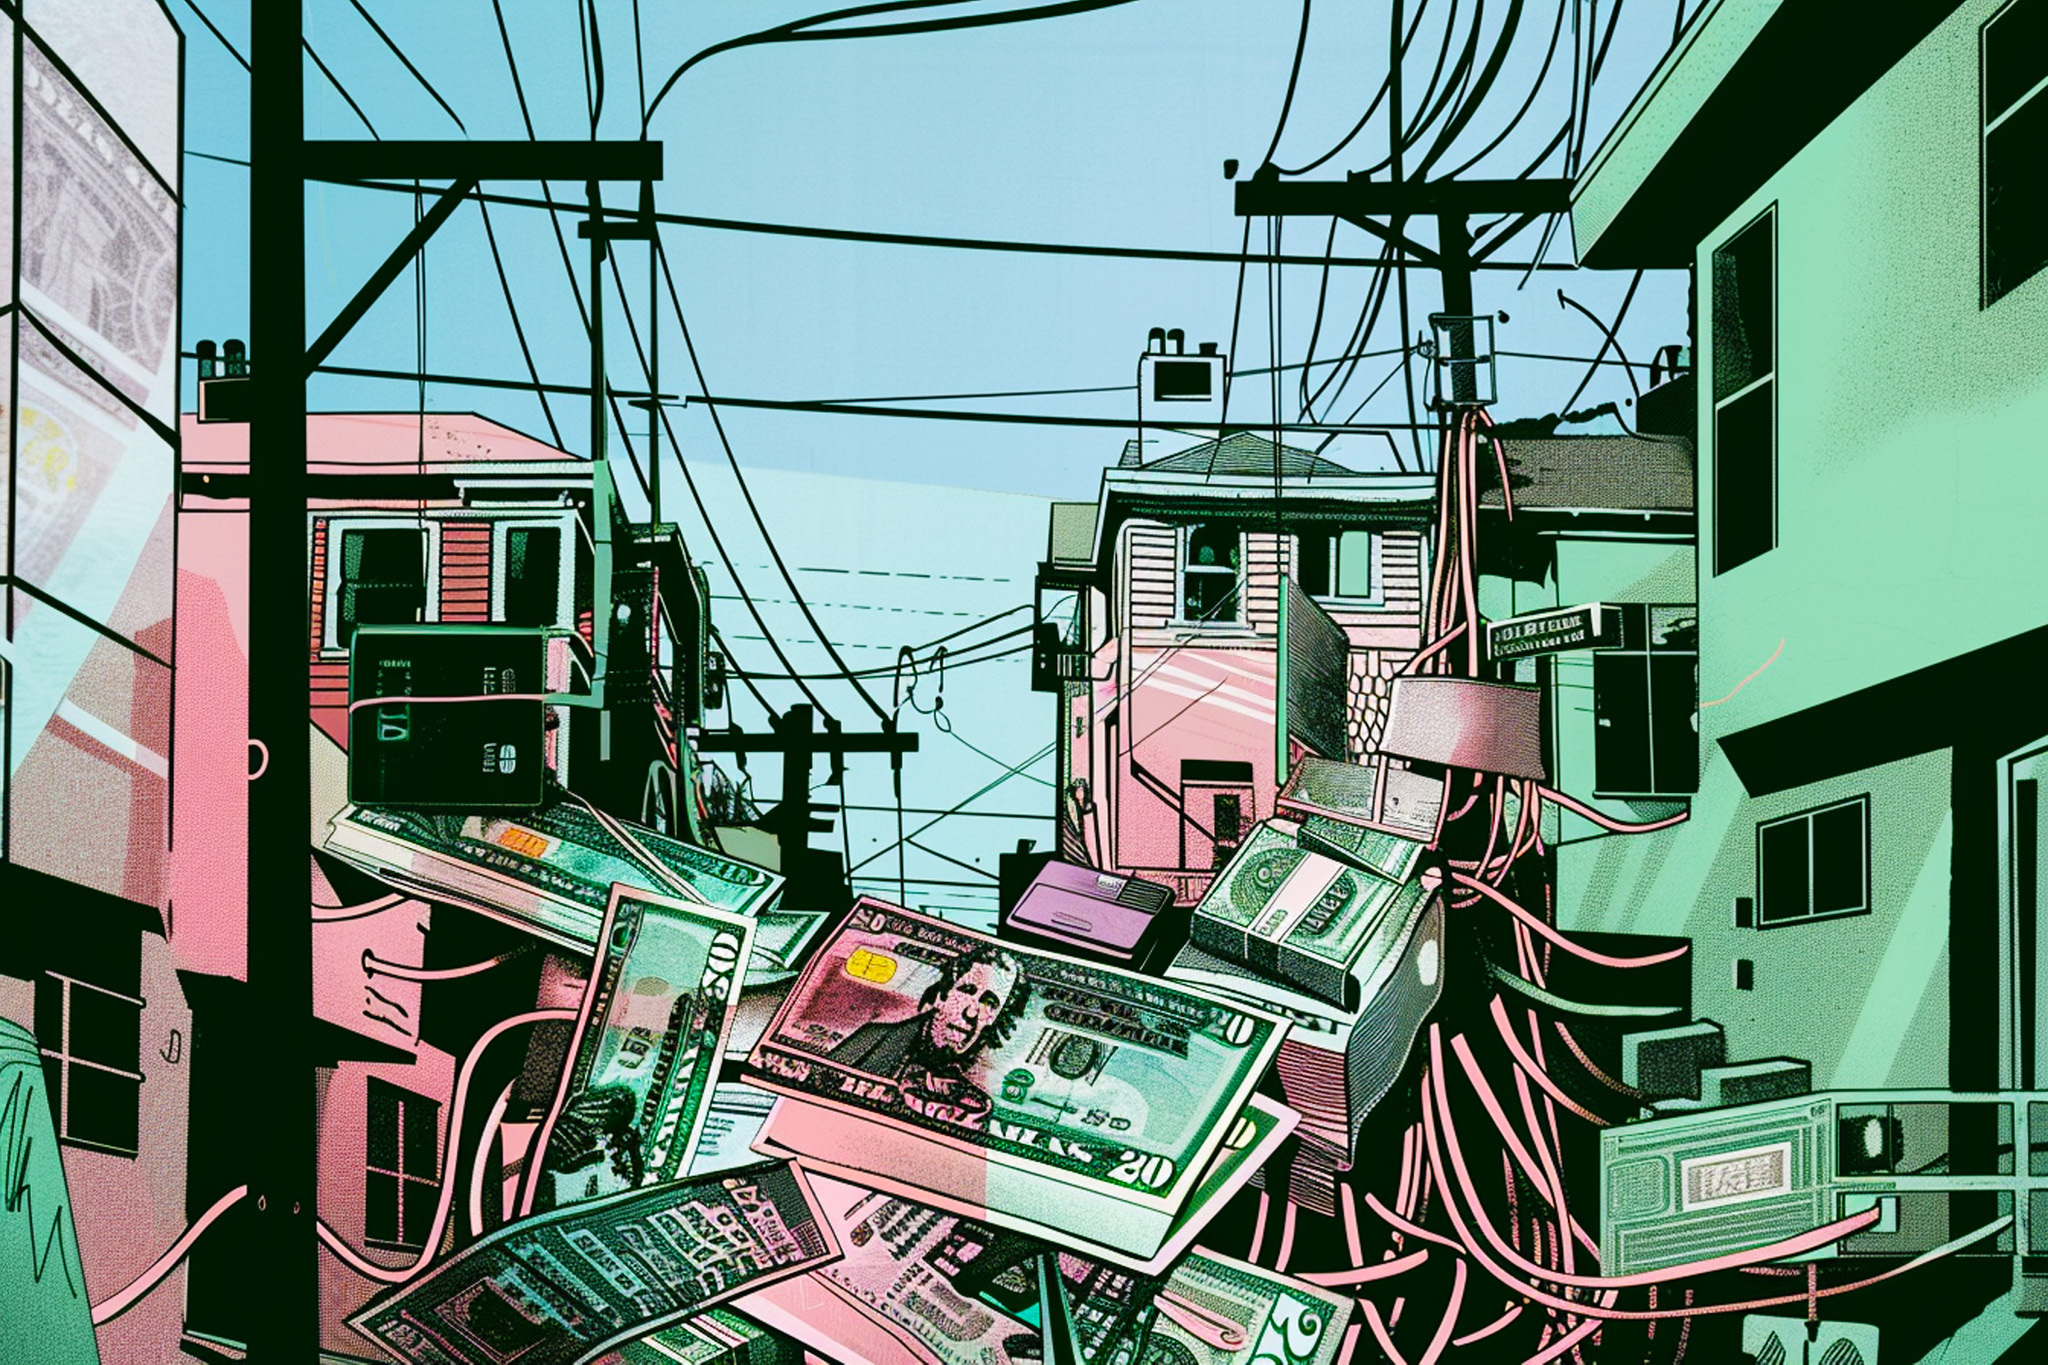 Illustration of an urban alley with cash, electronics, and tangled cables amidst pastel buildings.